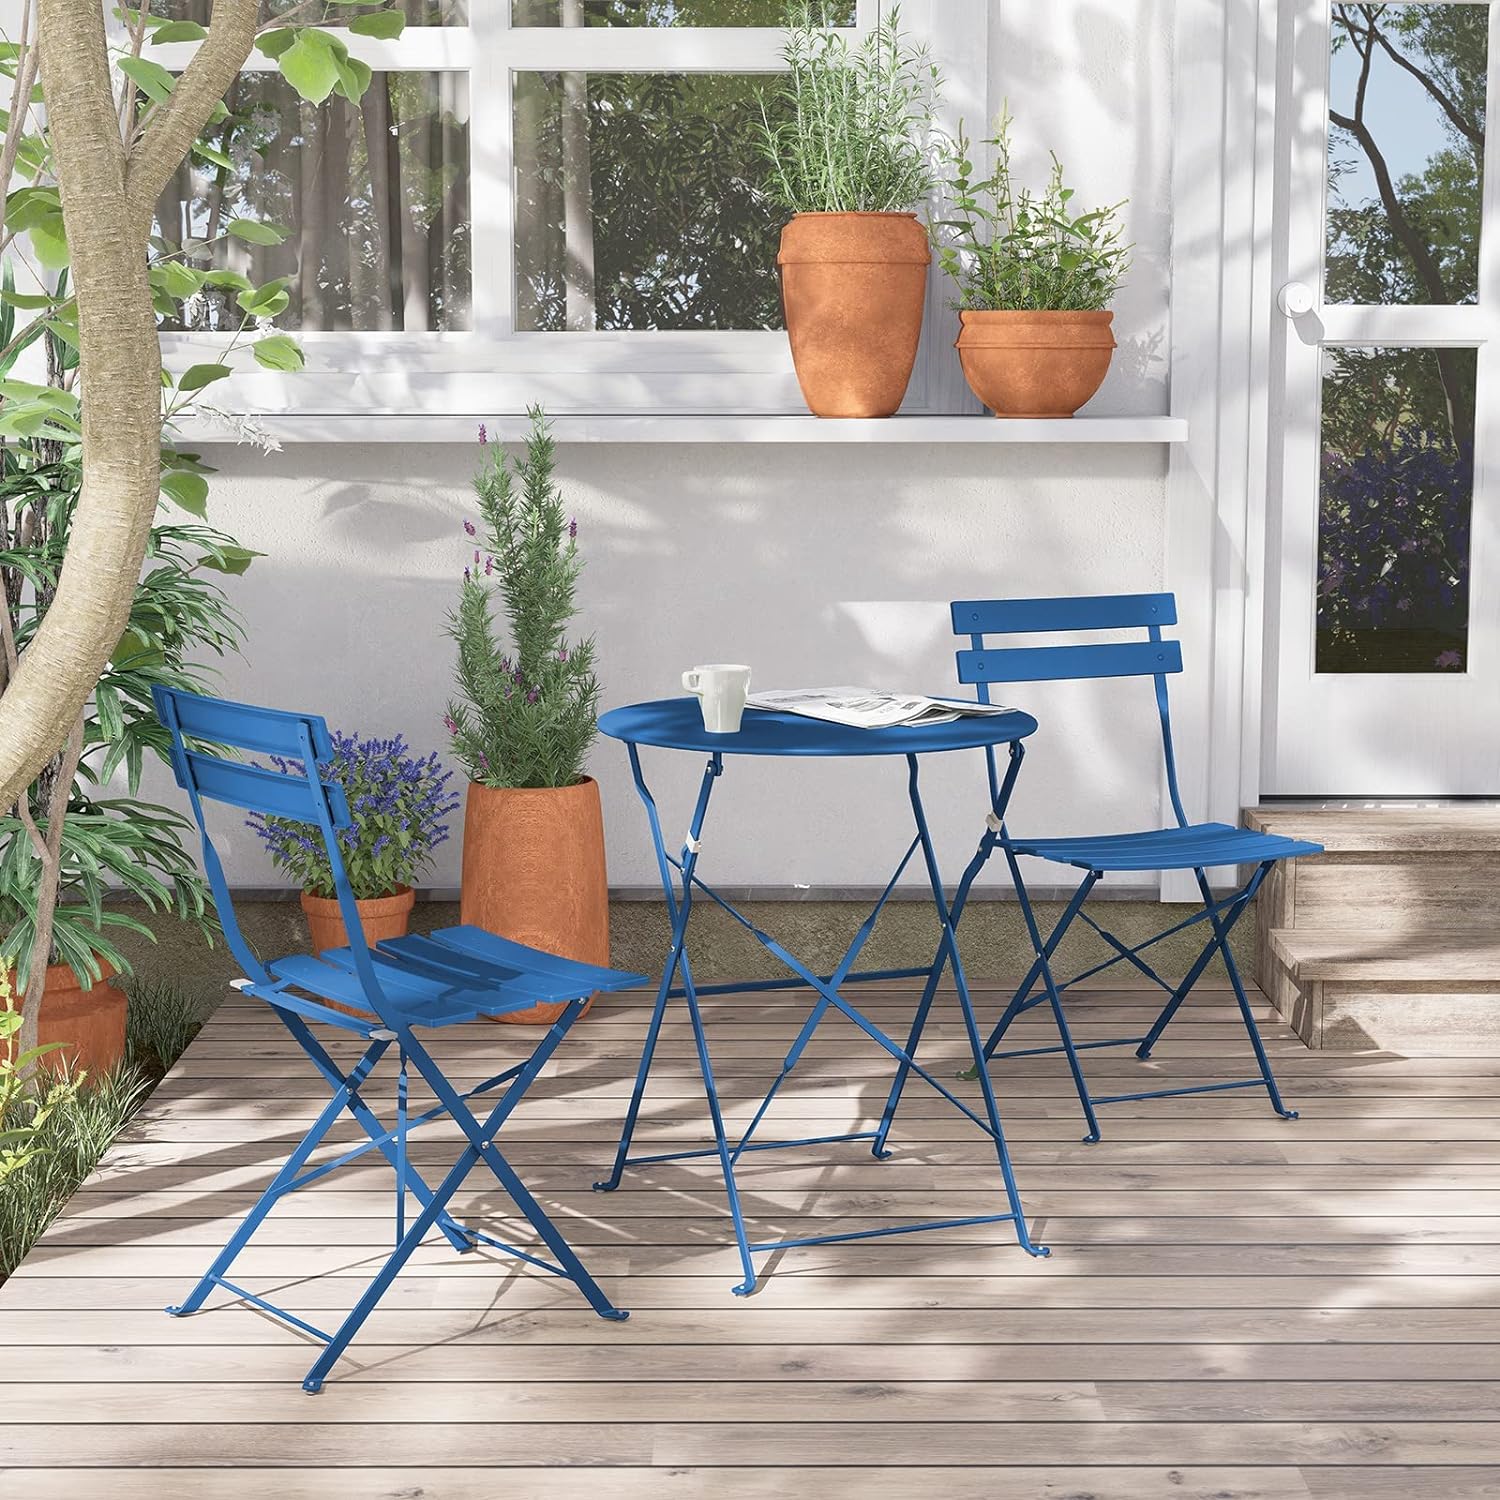 Grand Patio Metal 3-Piece Folding Bistro Table and Chairs Set, Outdoor Patio Dining Furniture for Small Spaces, Balcony, Peacock Blue - image 5 of 11